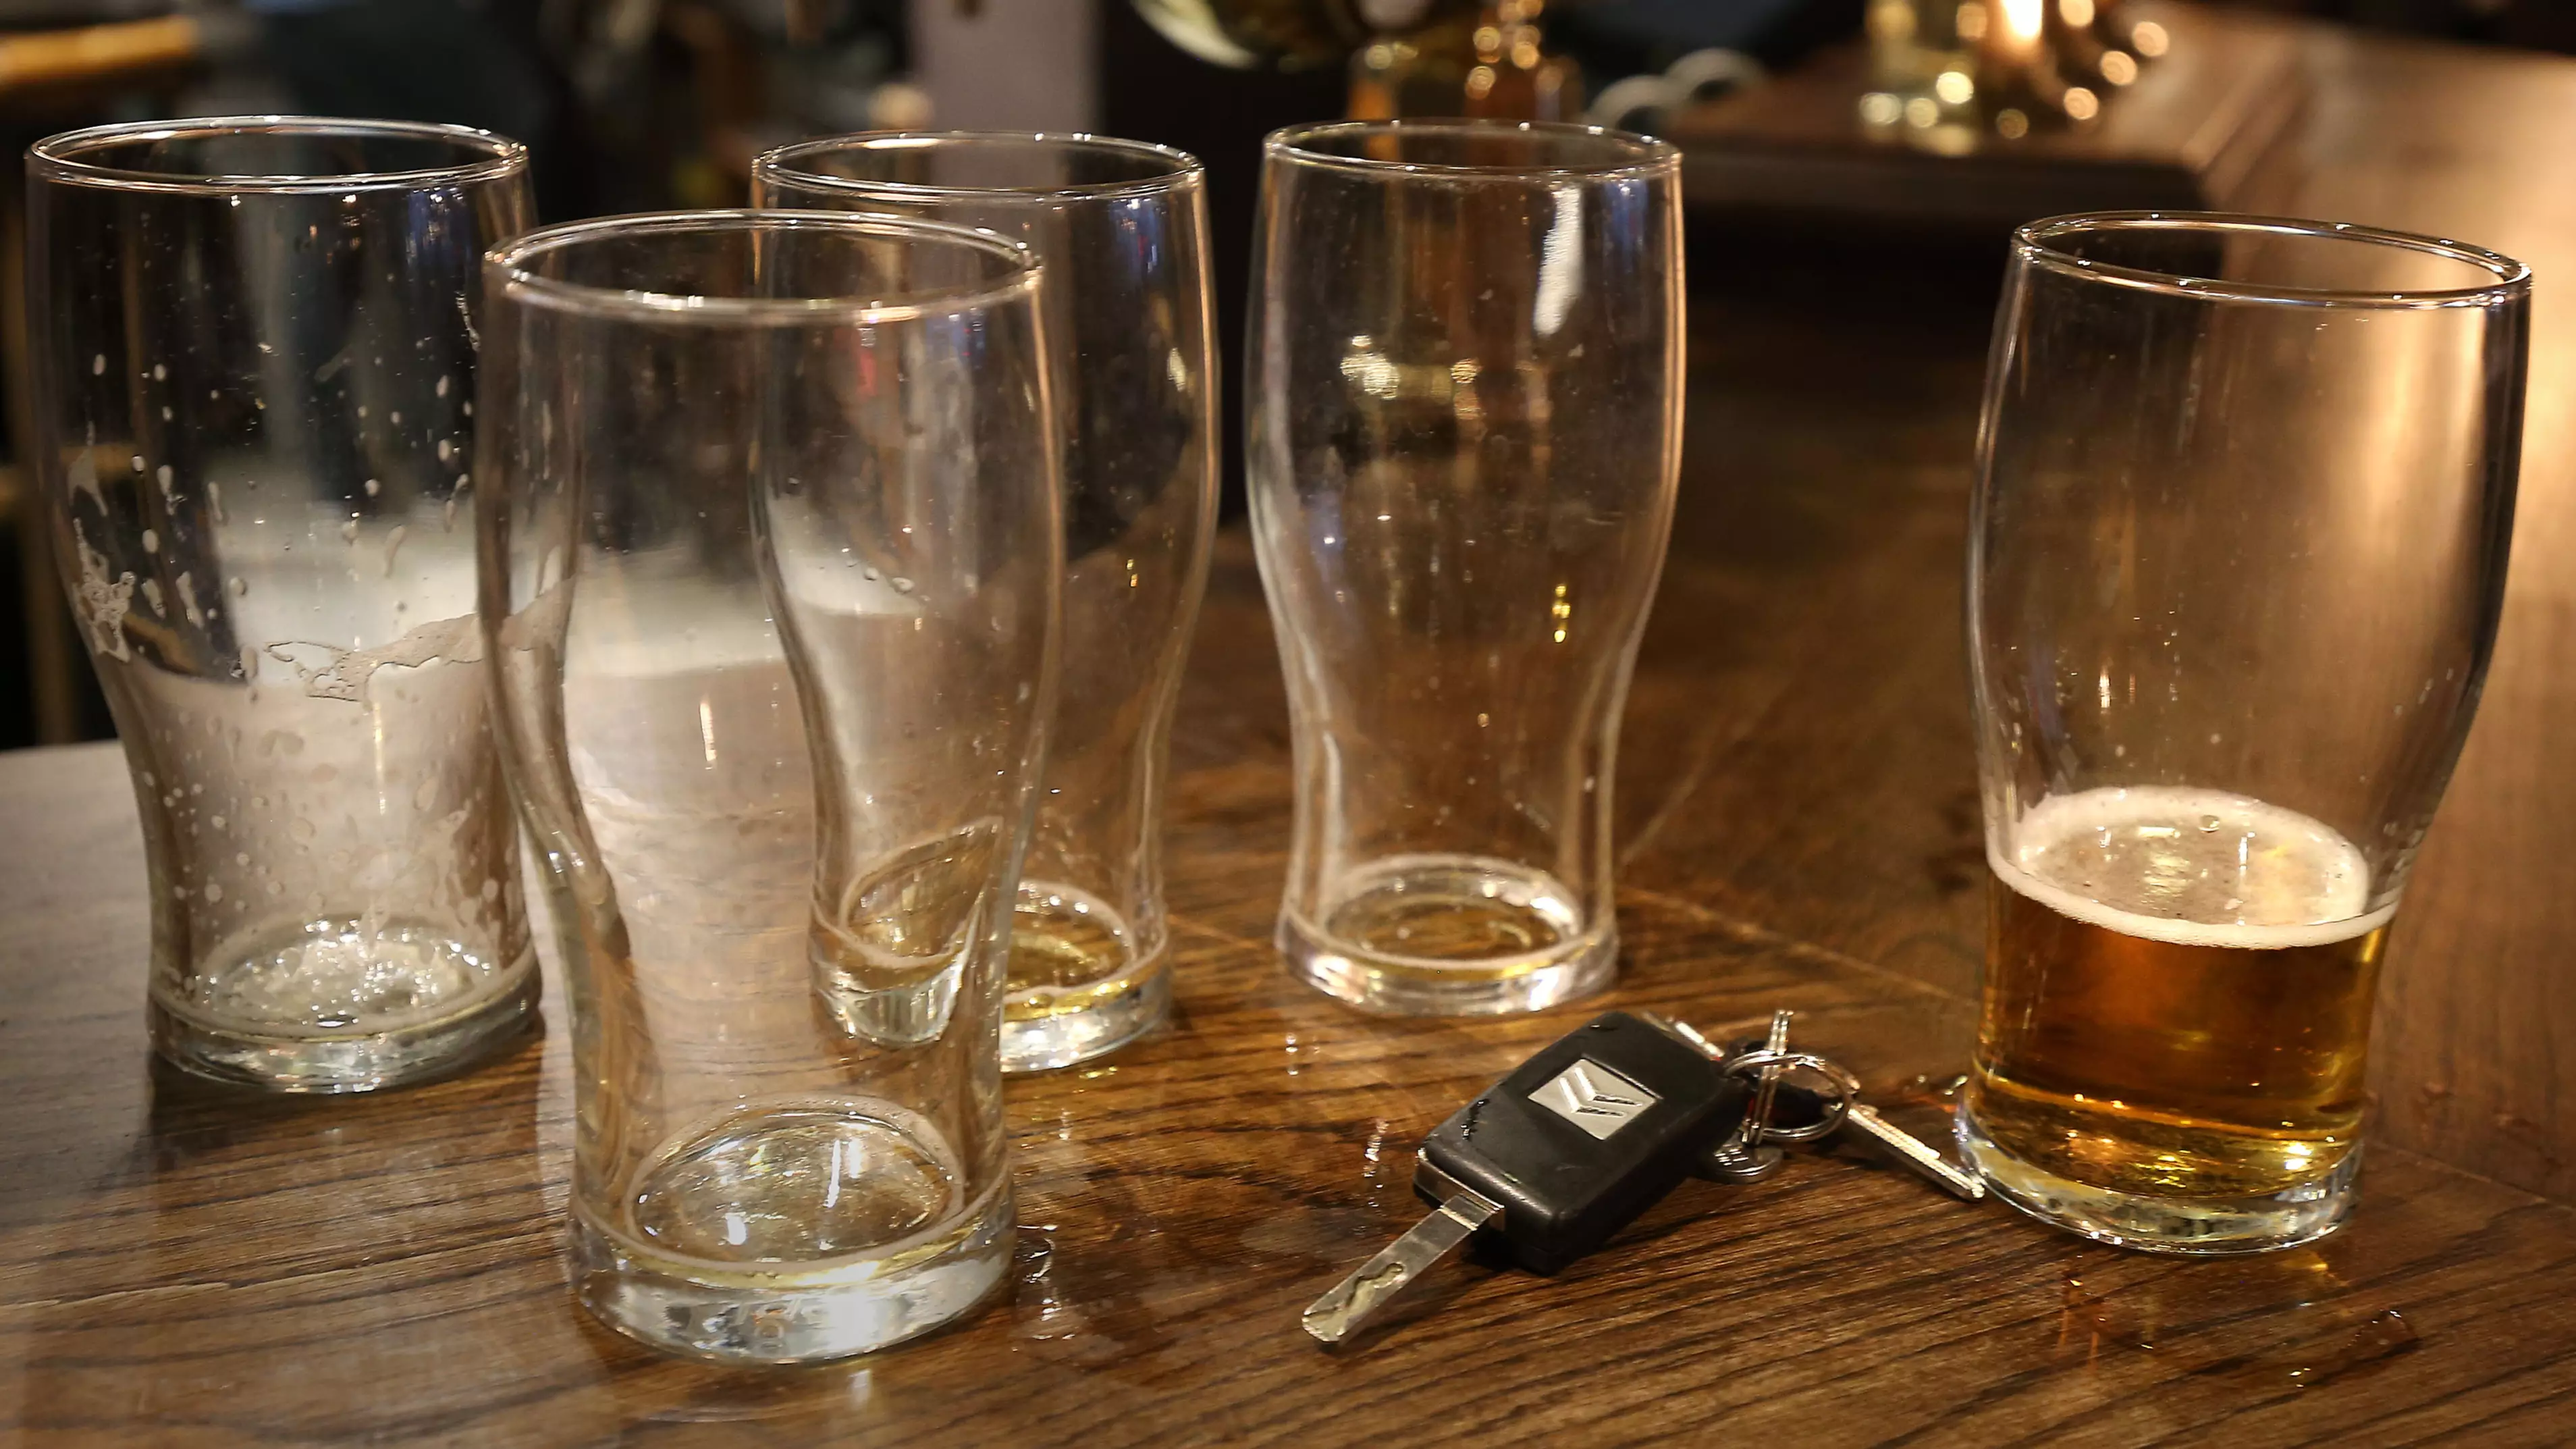 Drunk Driver Nine Times Over The Limit Thought To Have Given The Highest Reading Ever